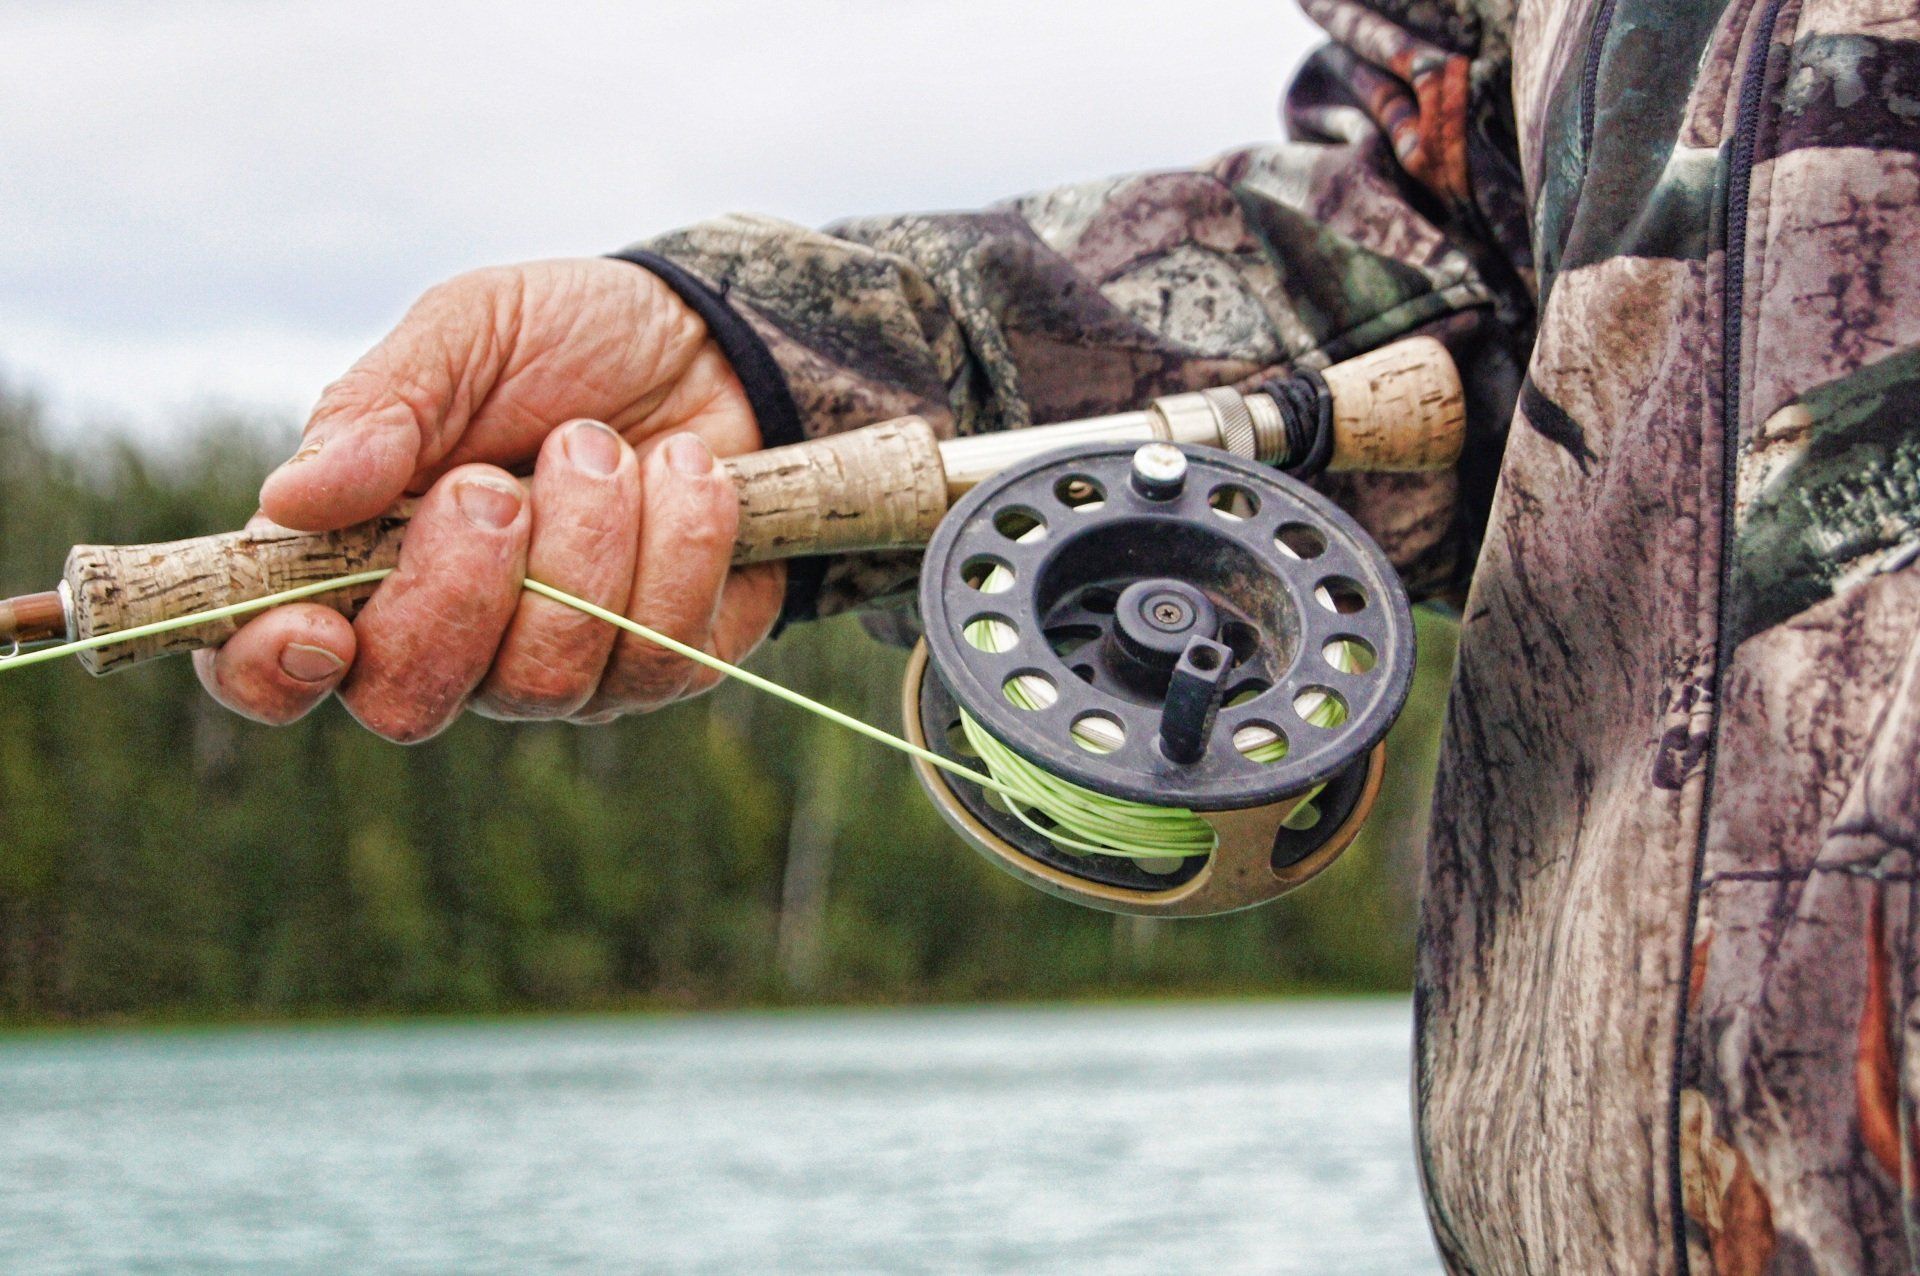 A person is holding a fishing rod and reel in their hand.